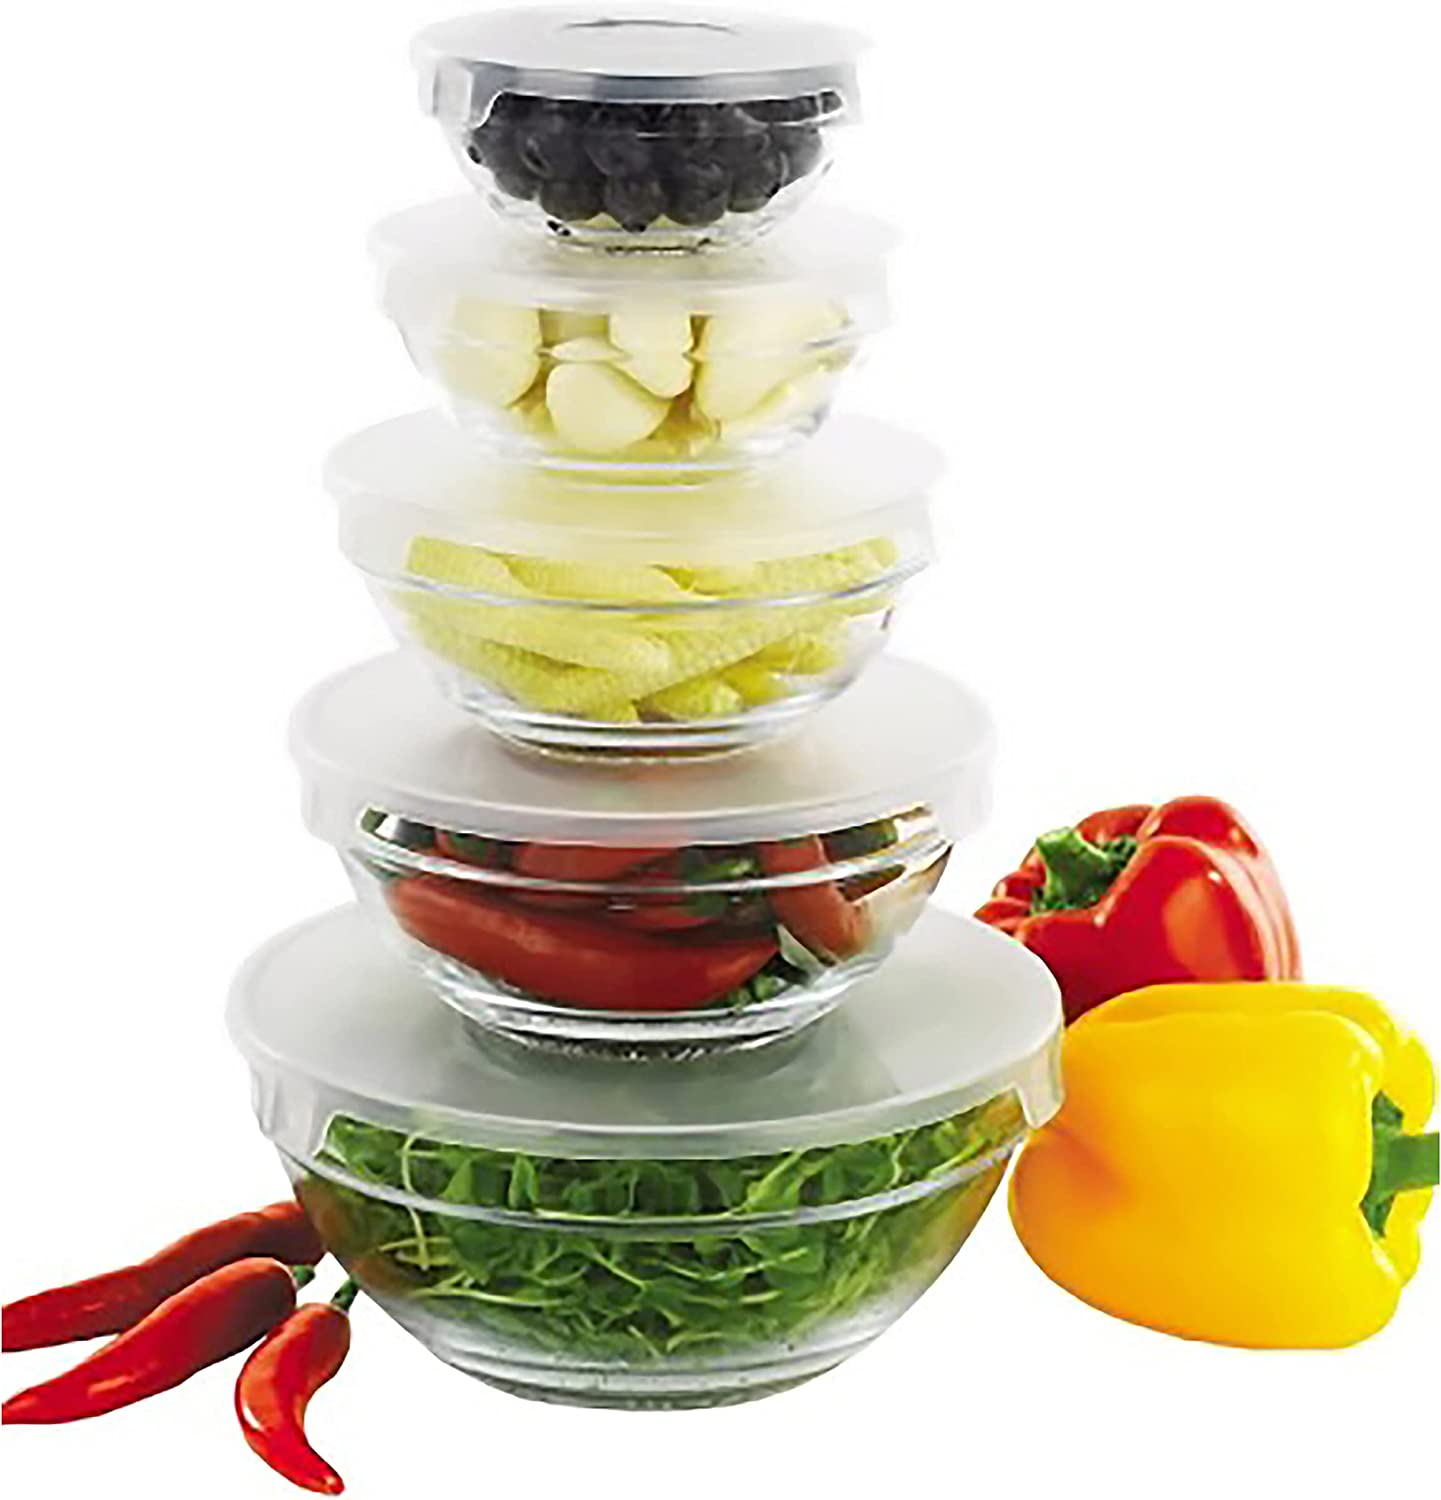 5 bowls with lids filled with food and stacked on each other.